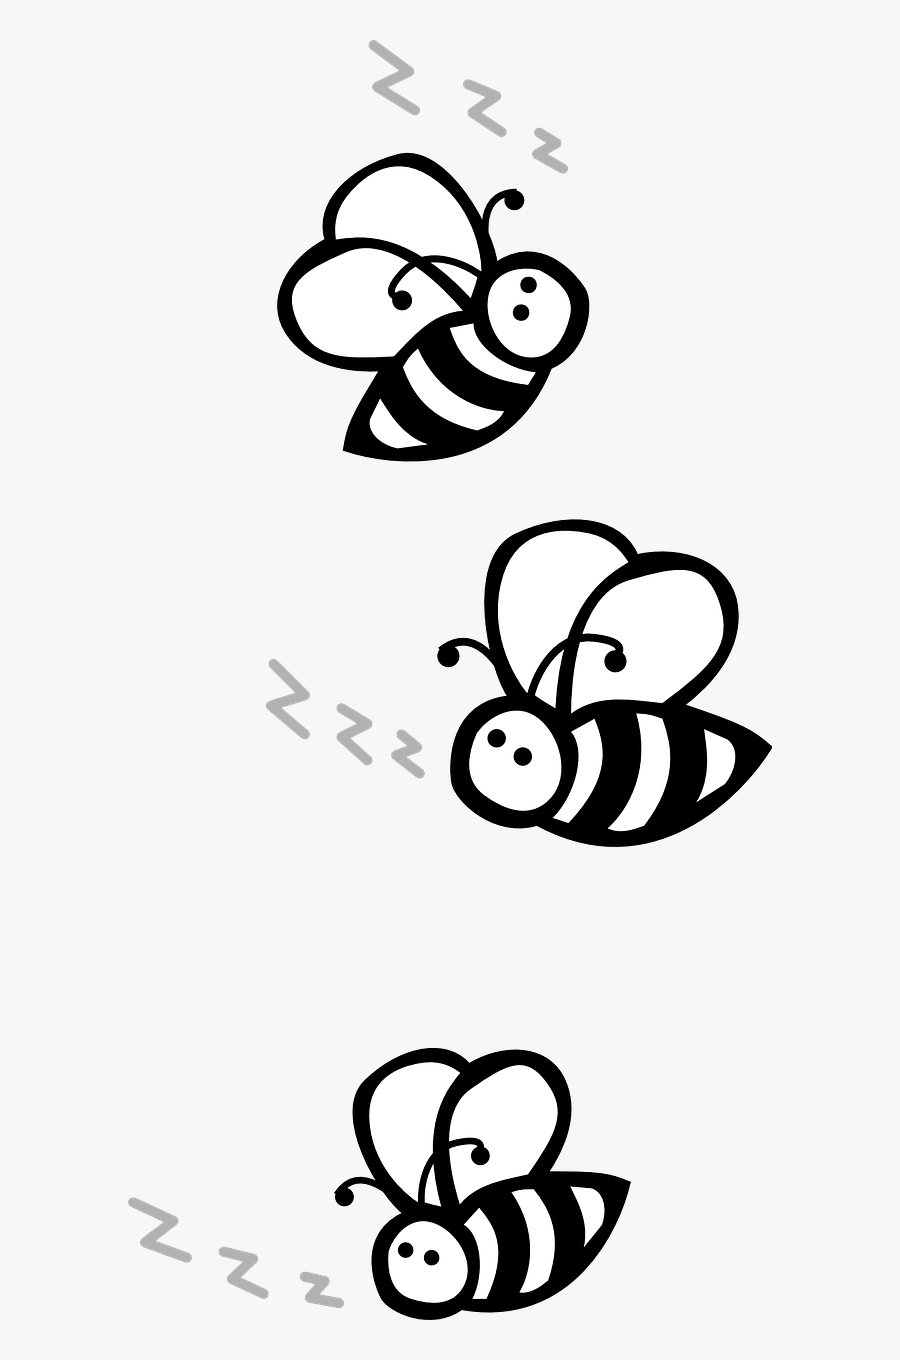 Bees Flying Black And White Free Picture - Bees Clip Art Black And White, Transparent Clipart